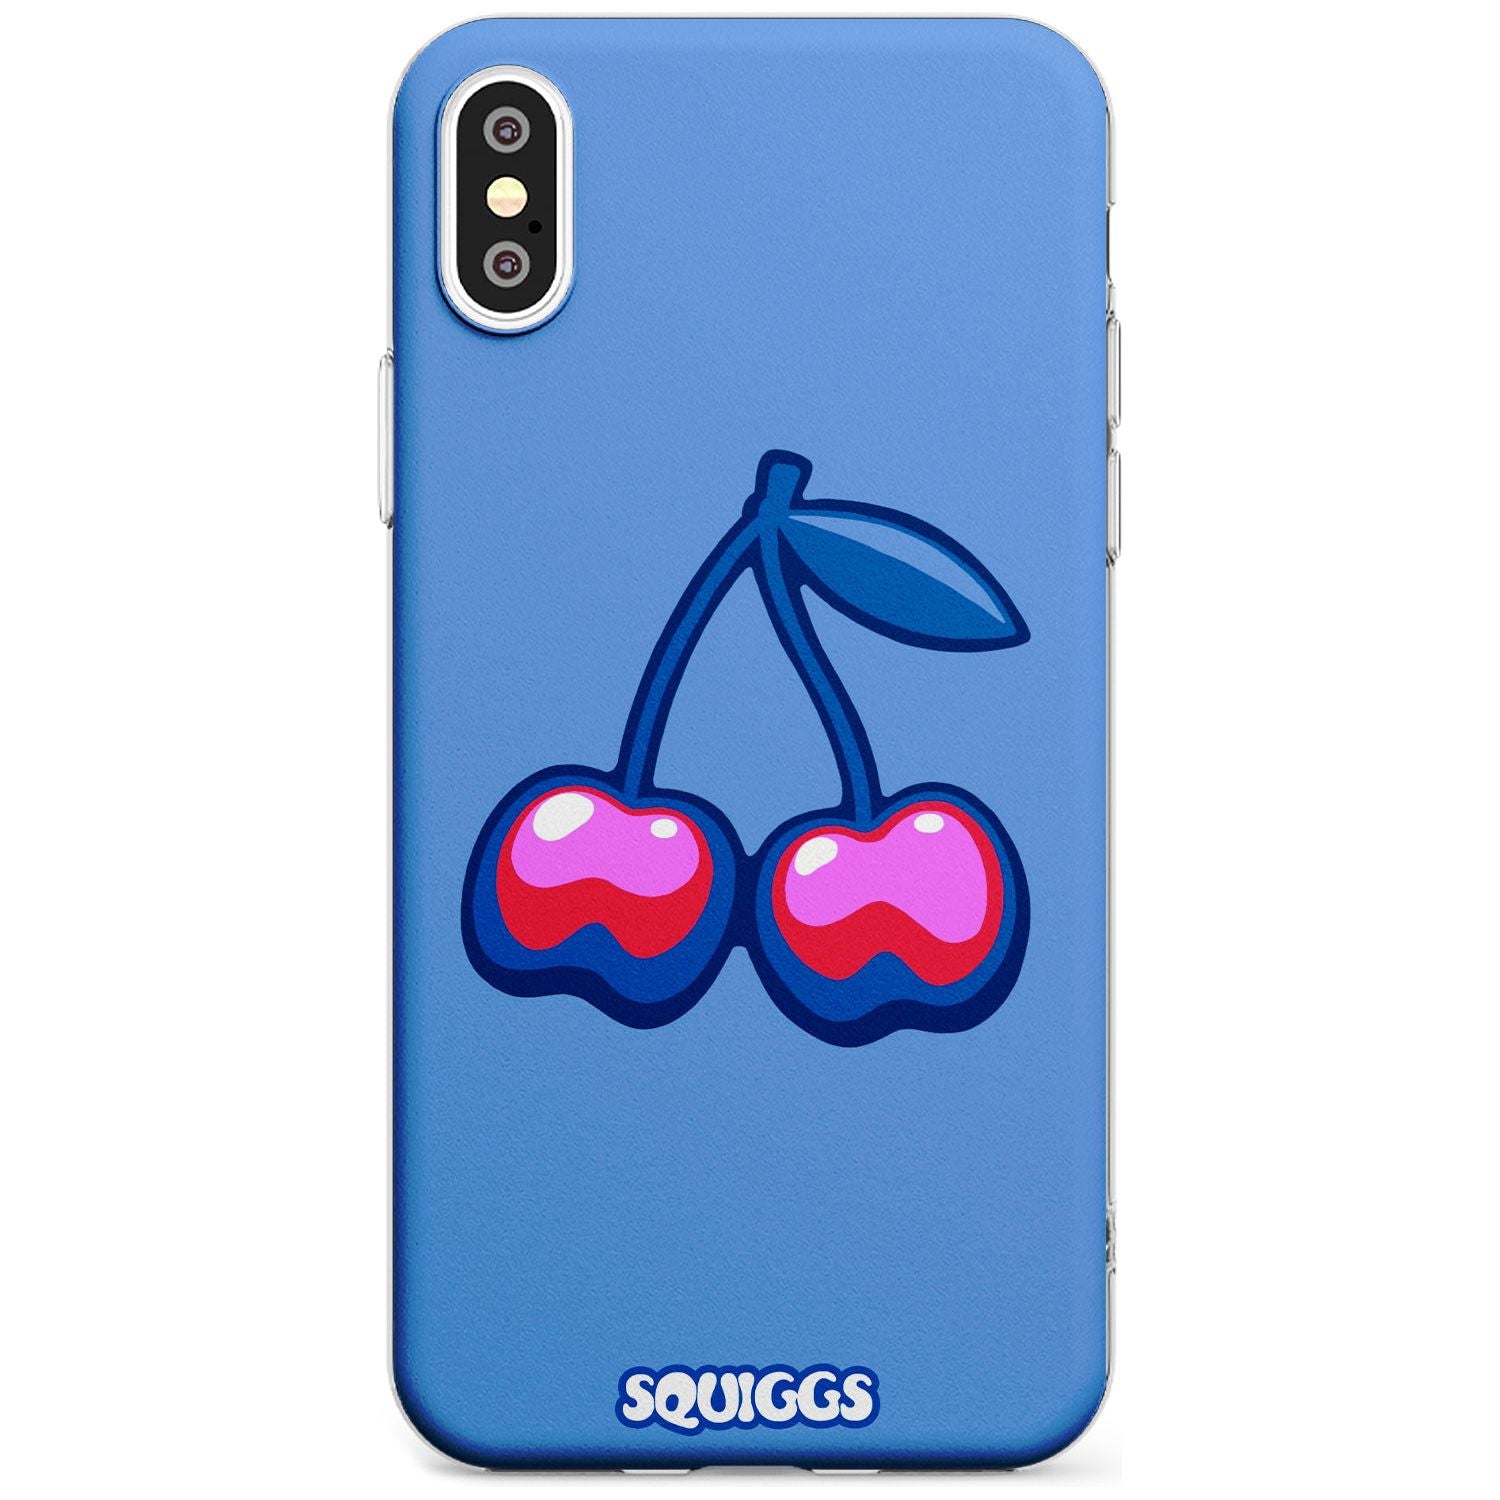 Cherry Bomb Black Impact Phone Case for iPhone X XS Max XR